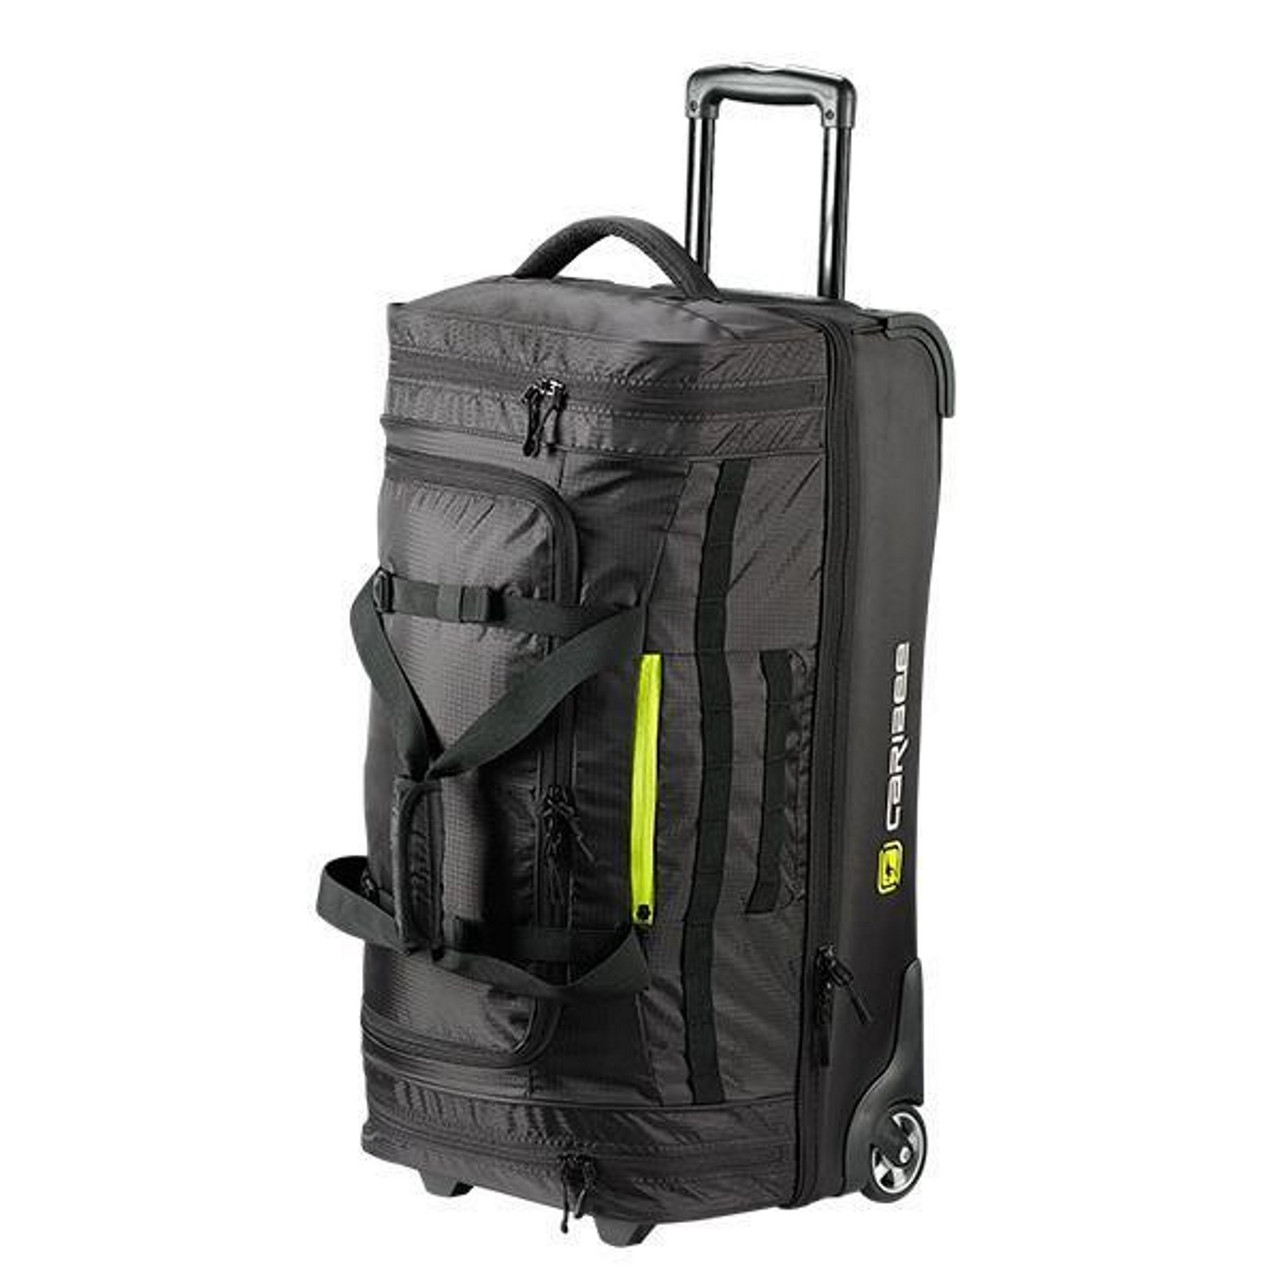 Caribee Scarecrow DX 70 Wheeled Travel Bag at Luggage Superstore